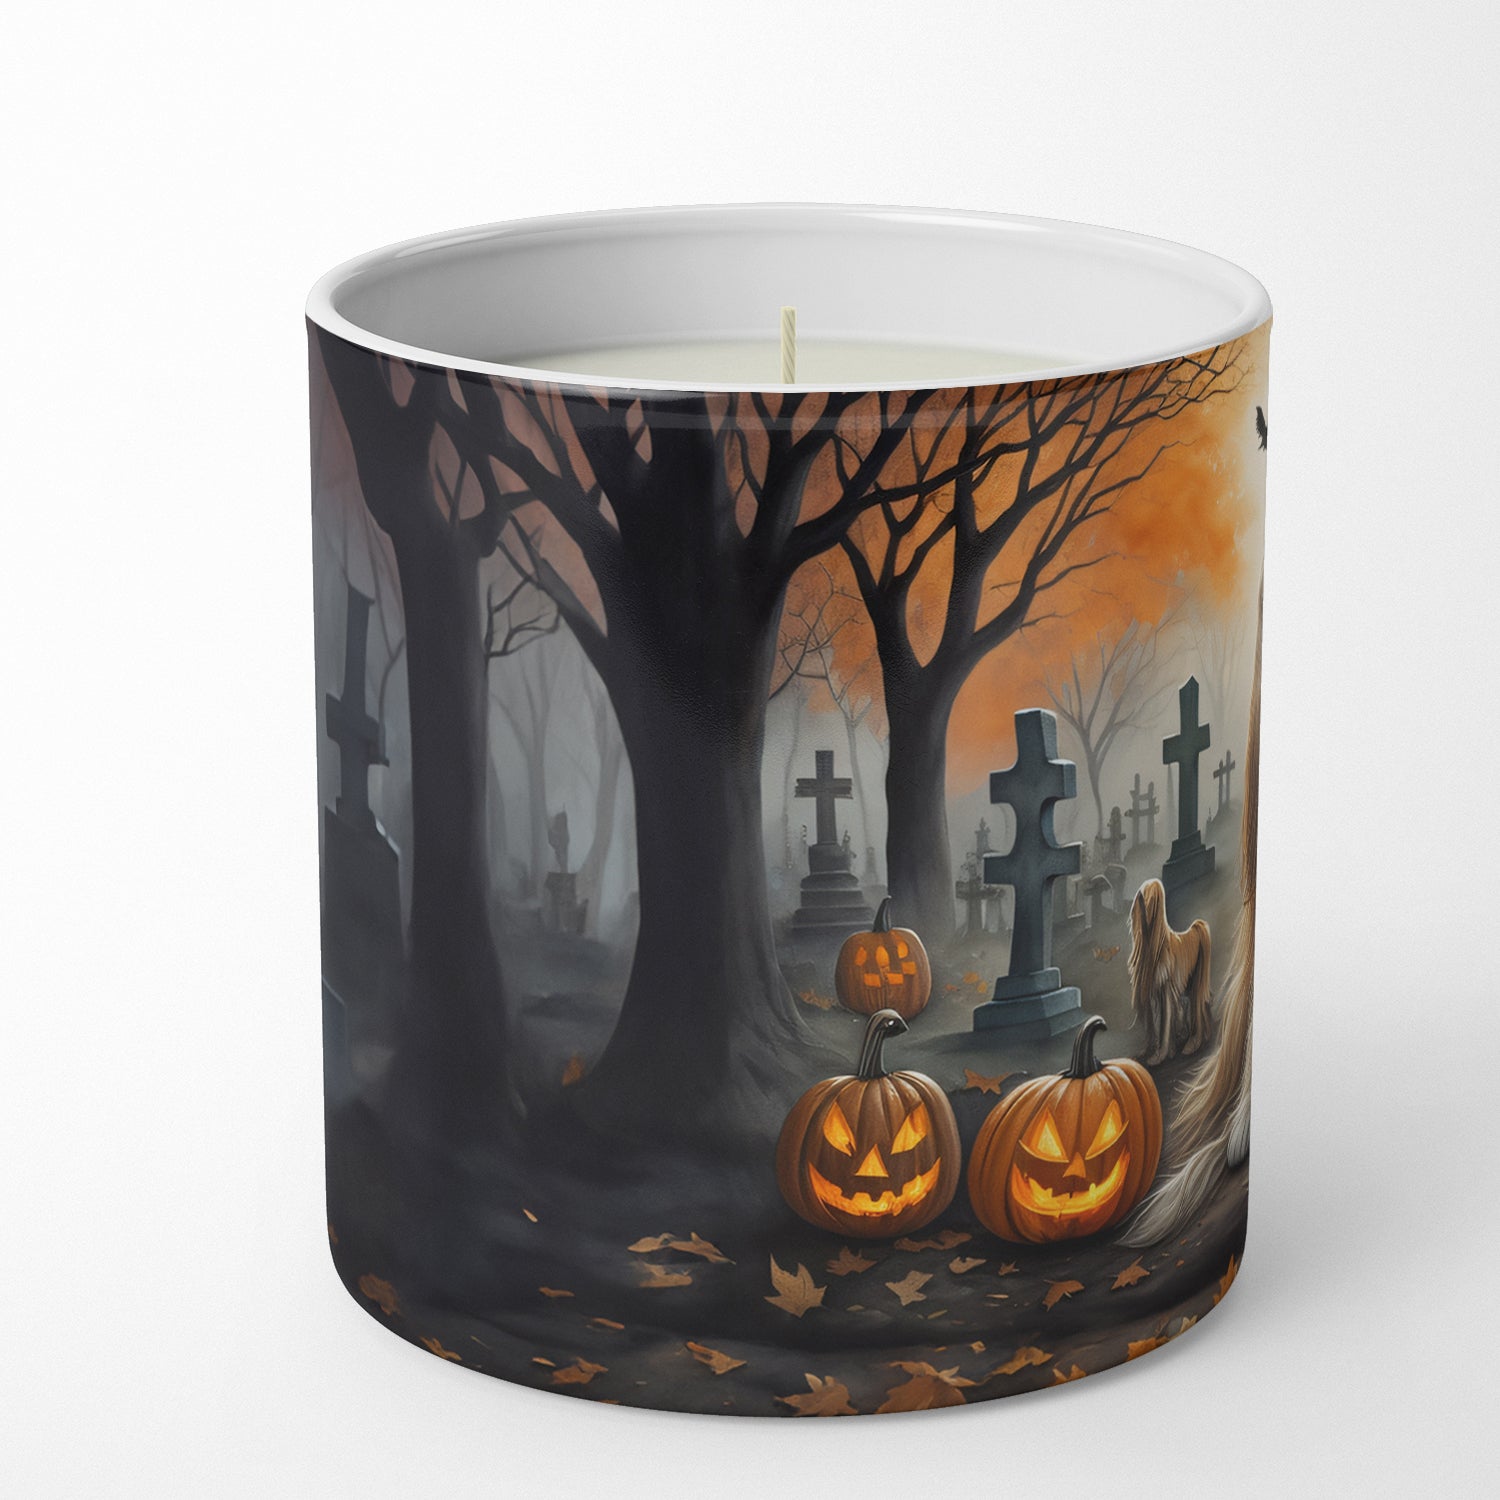 Afghan Hound Spooky Halloween Decorative Soy Candle